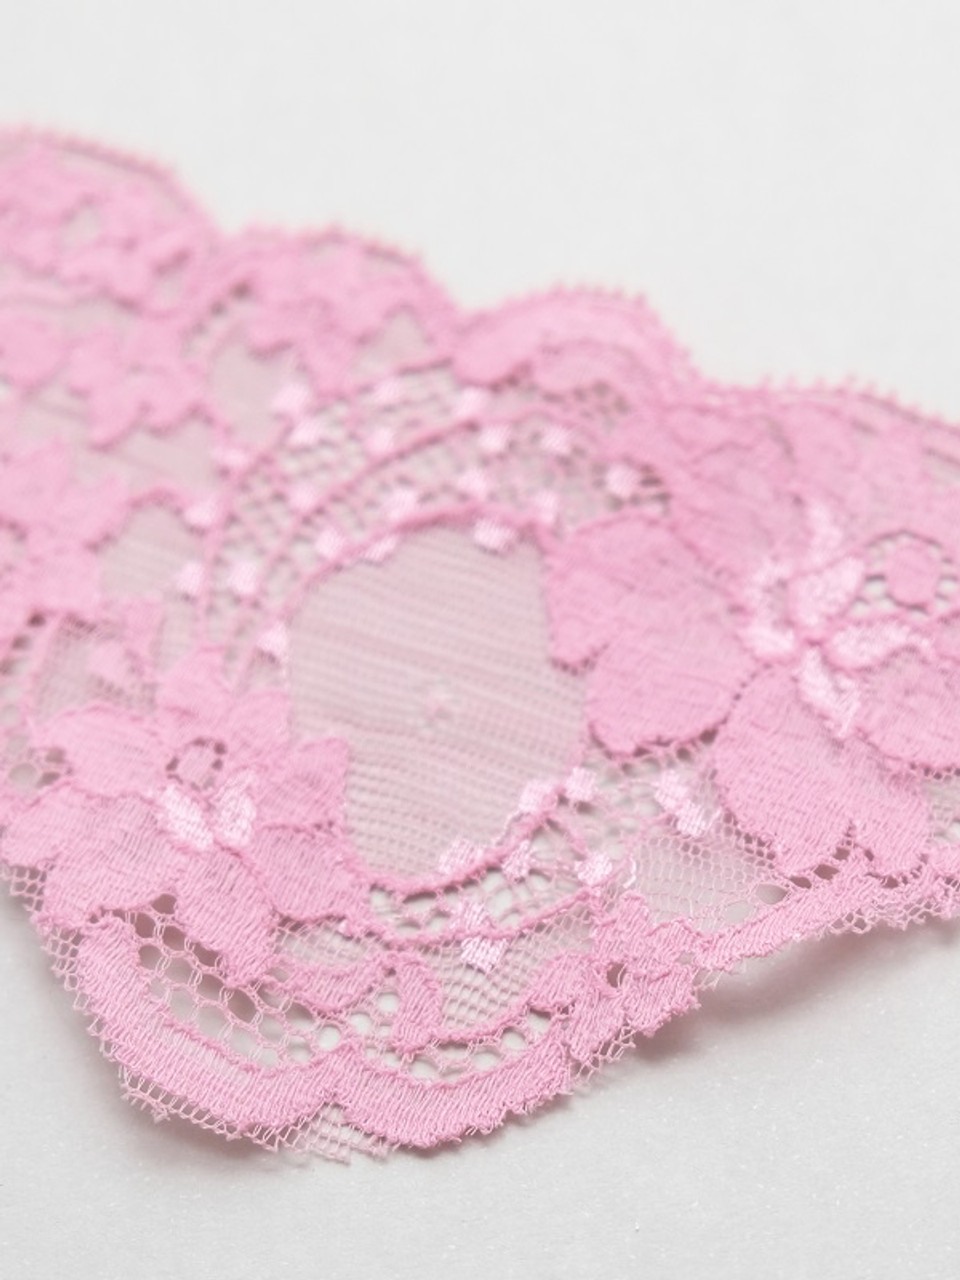 Stretch Lace Galloon, 2+1/4 inch - Cheeptrims